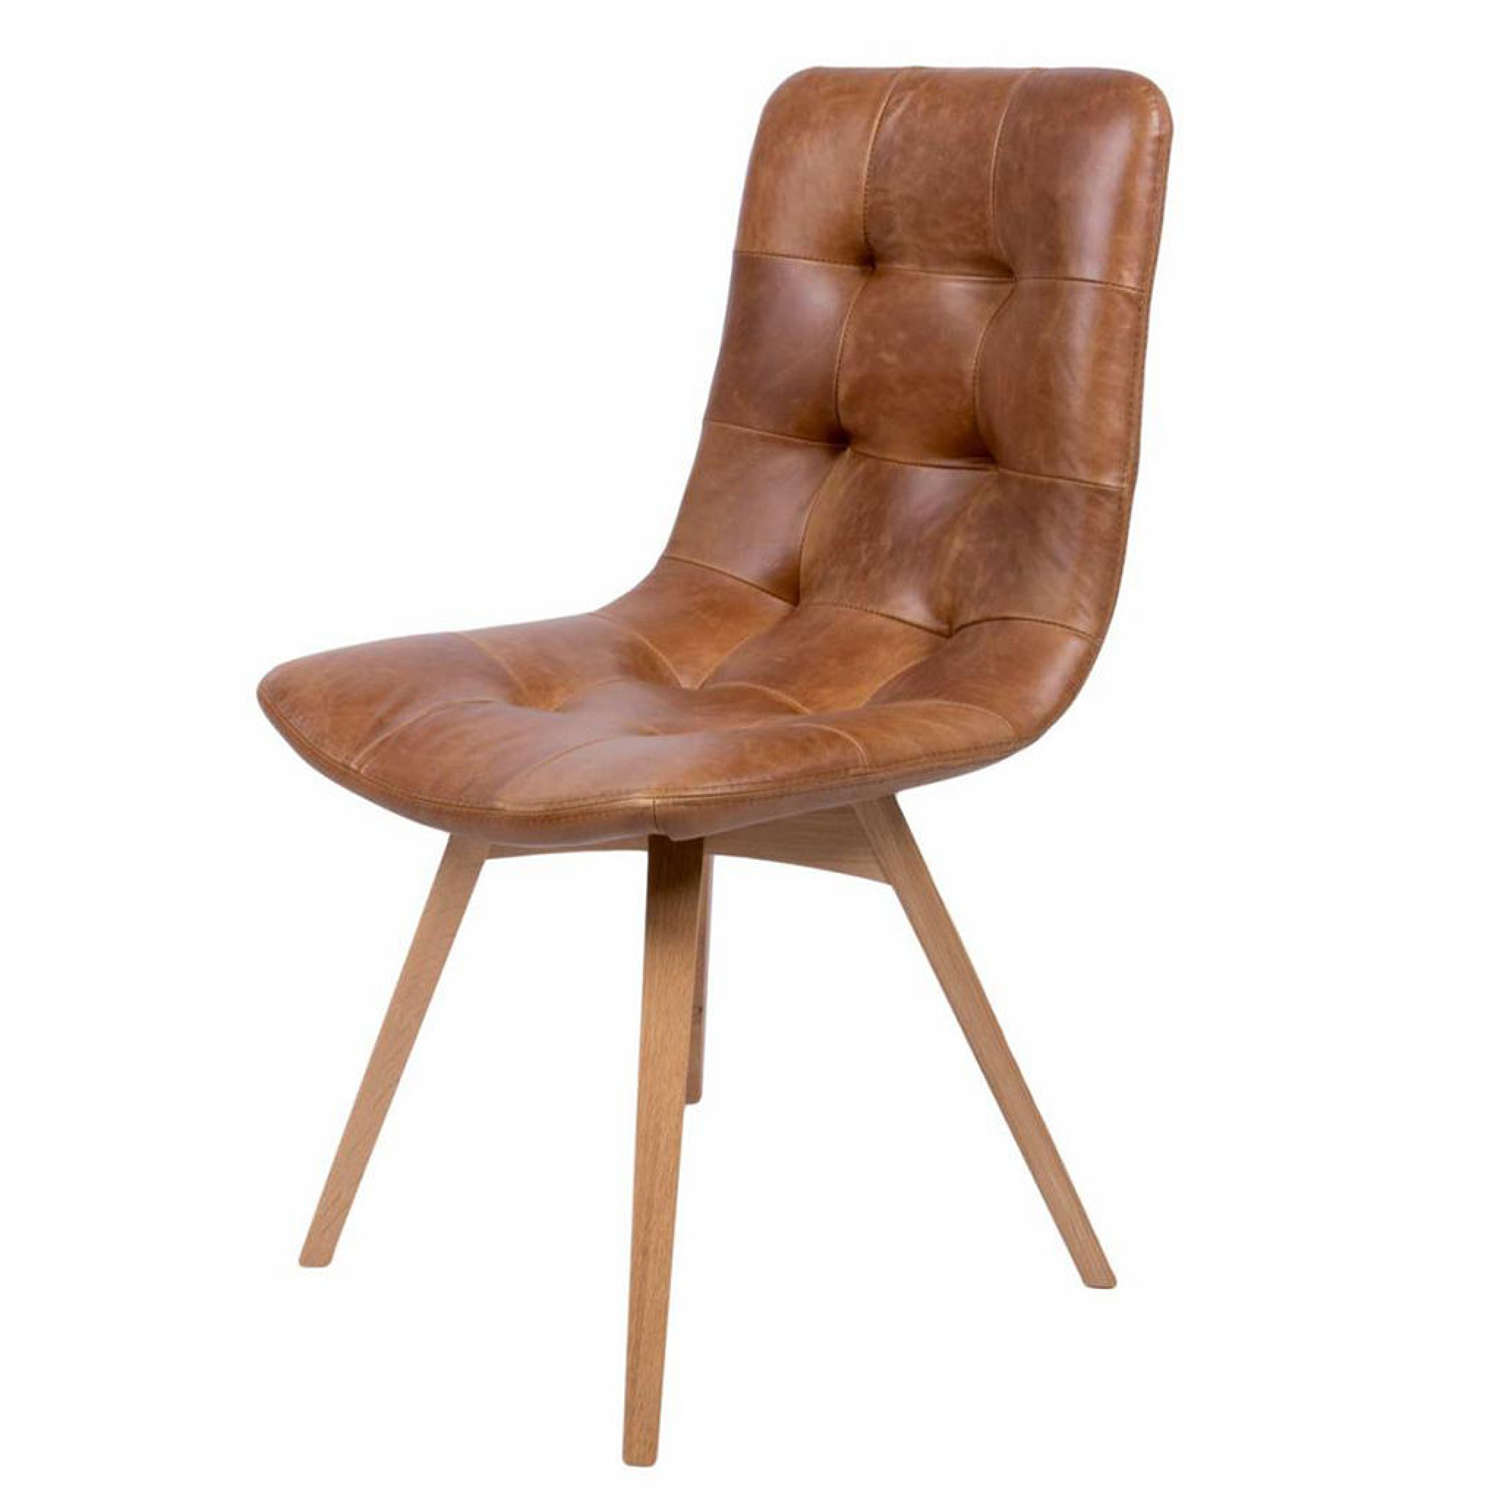 Allegro Dining chair in Cerato brown leather